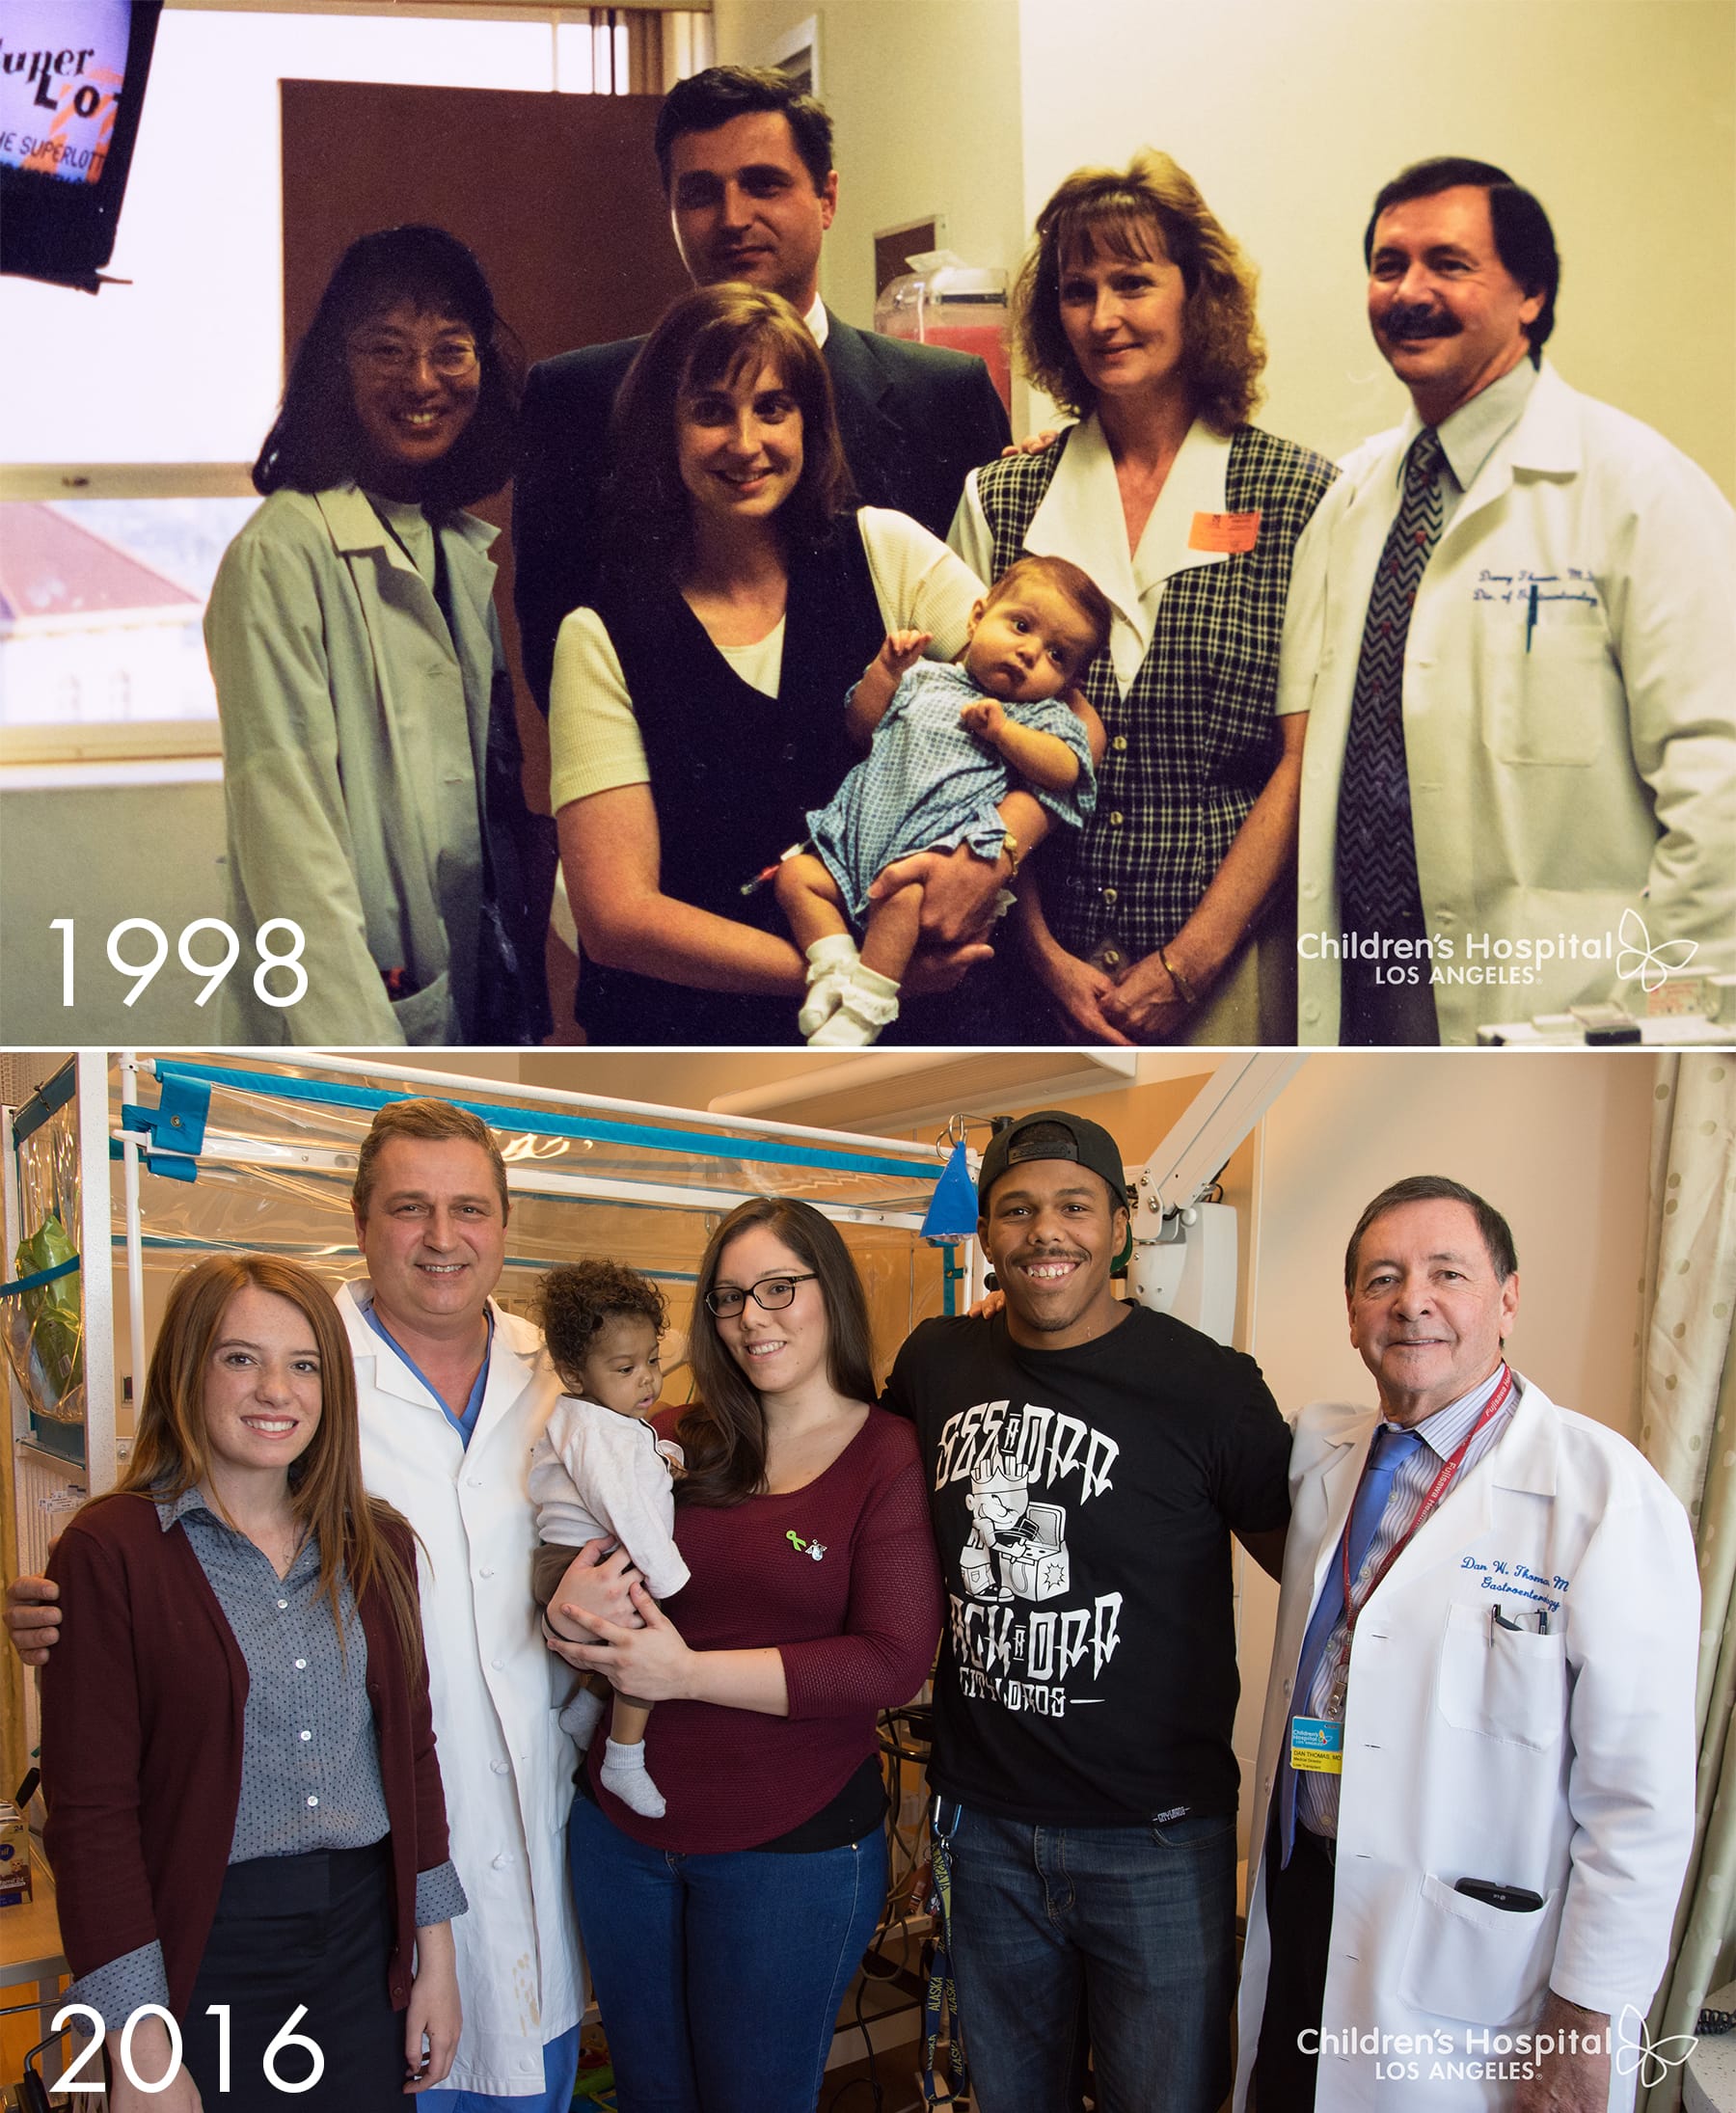 Top: Lydia Hand as an infant post-transplant in 1998, with her mother, grandmother and liver transplant team. Bottom: Baby Donovan Daniels and his parents post-transplant in 2016, joined by doctors and Lydia, now 18.